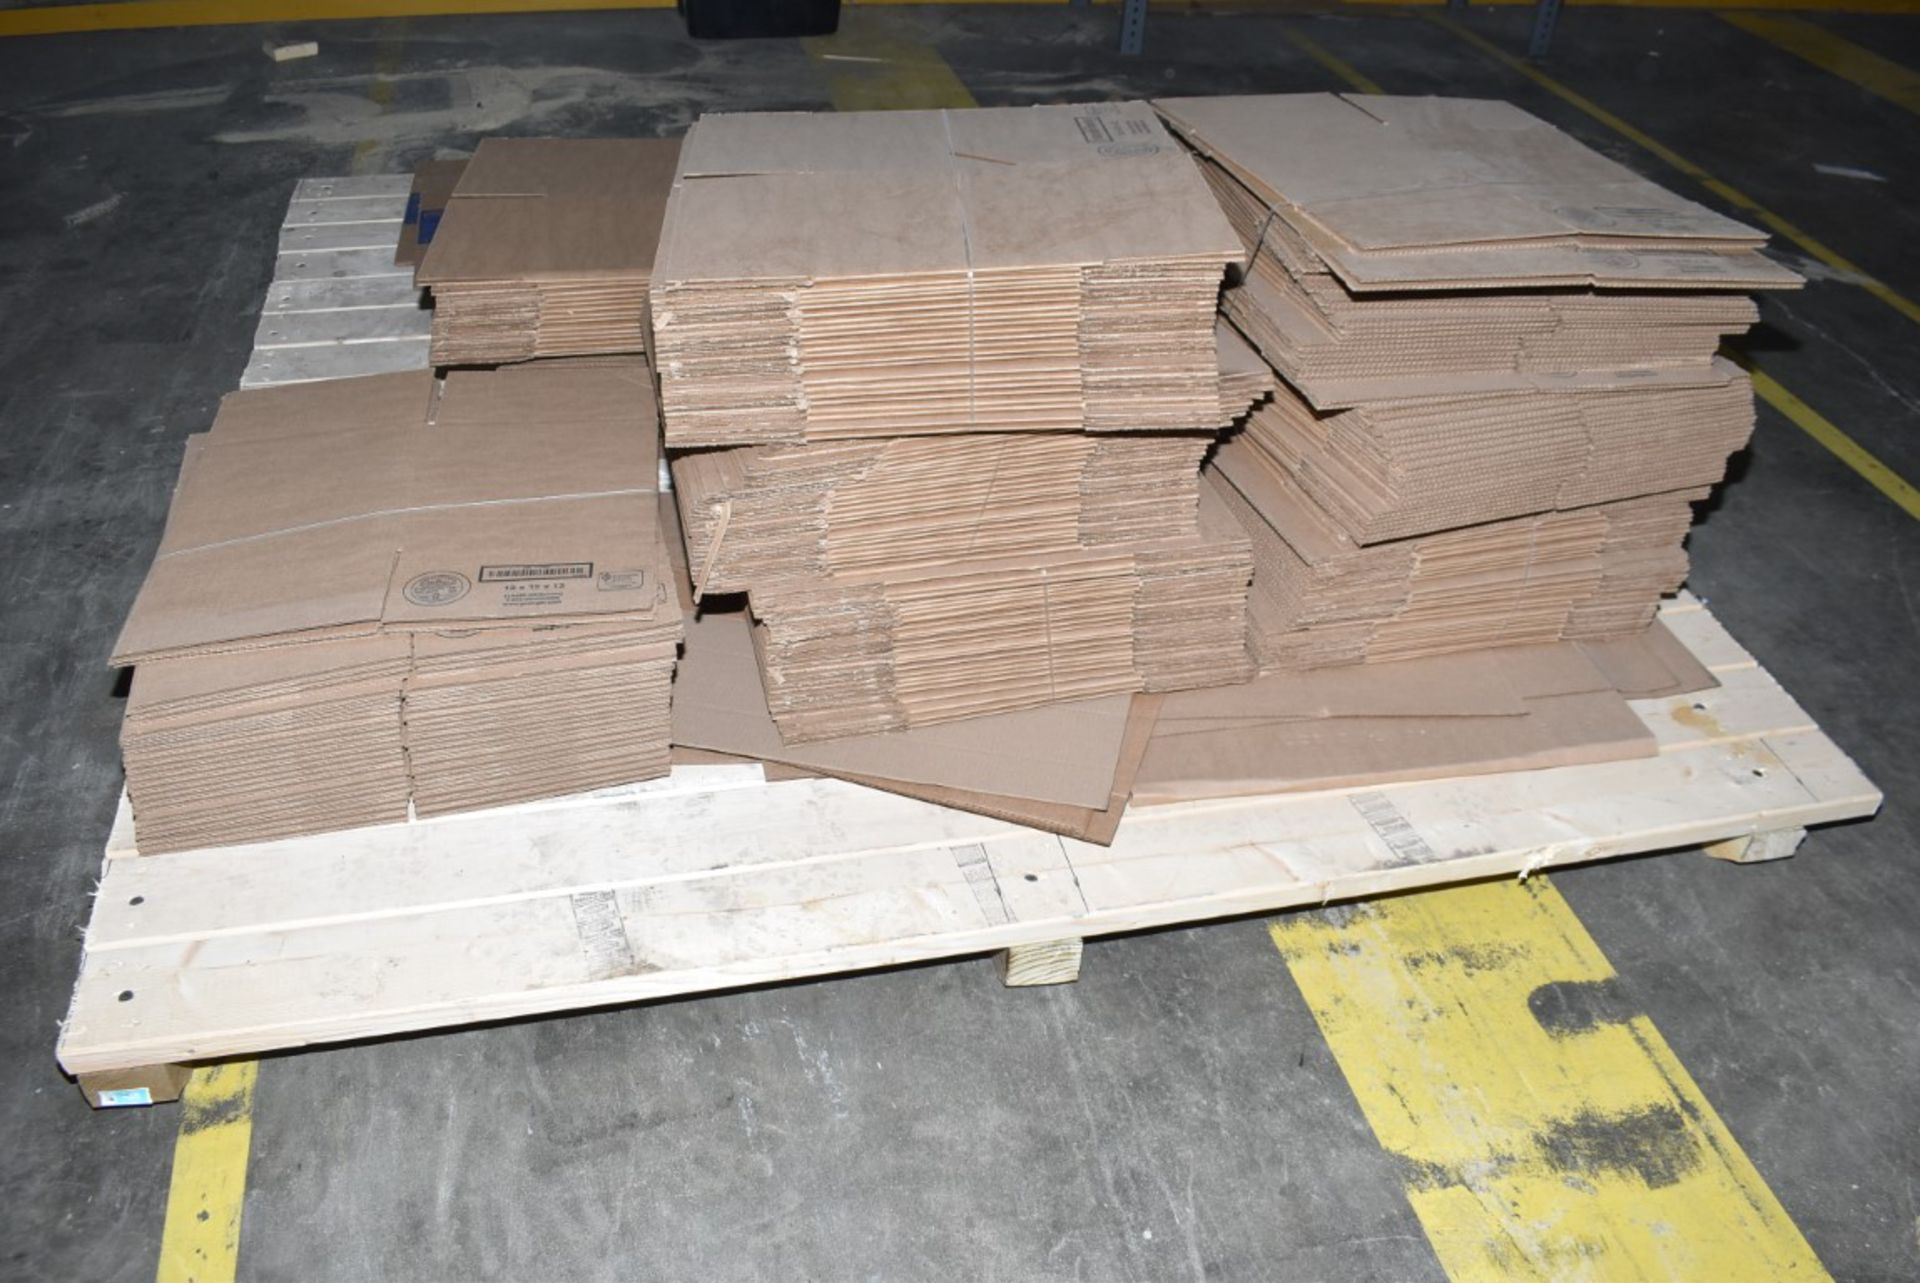 LOT/ PACKAGING SUPPLIES - INCLUDING PLASTIC SHEETING, CORRUGATED CARDBOARD SHIPPING CARTONS [RIGGING - Image 5 of 6